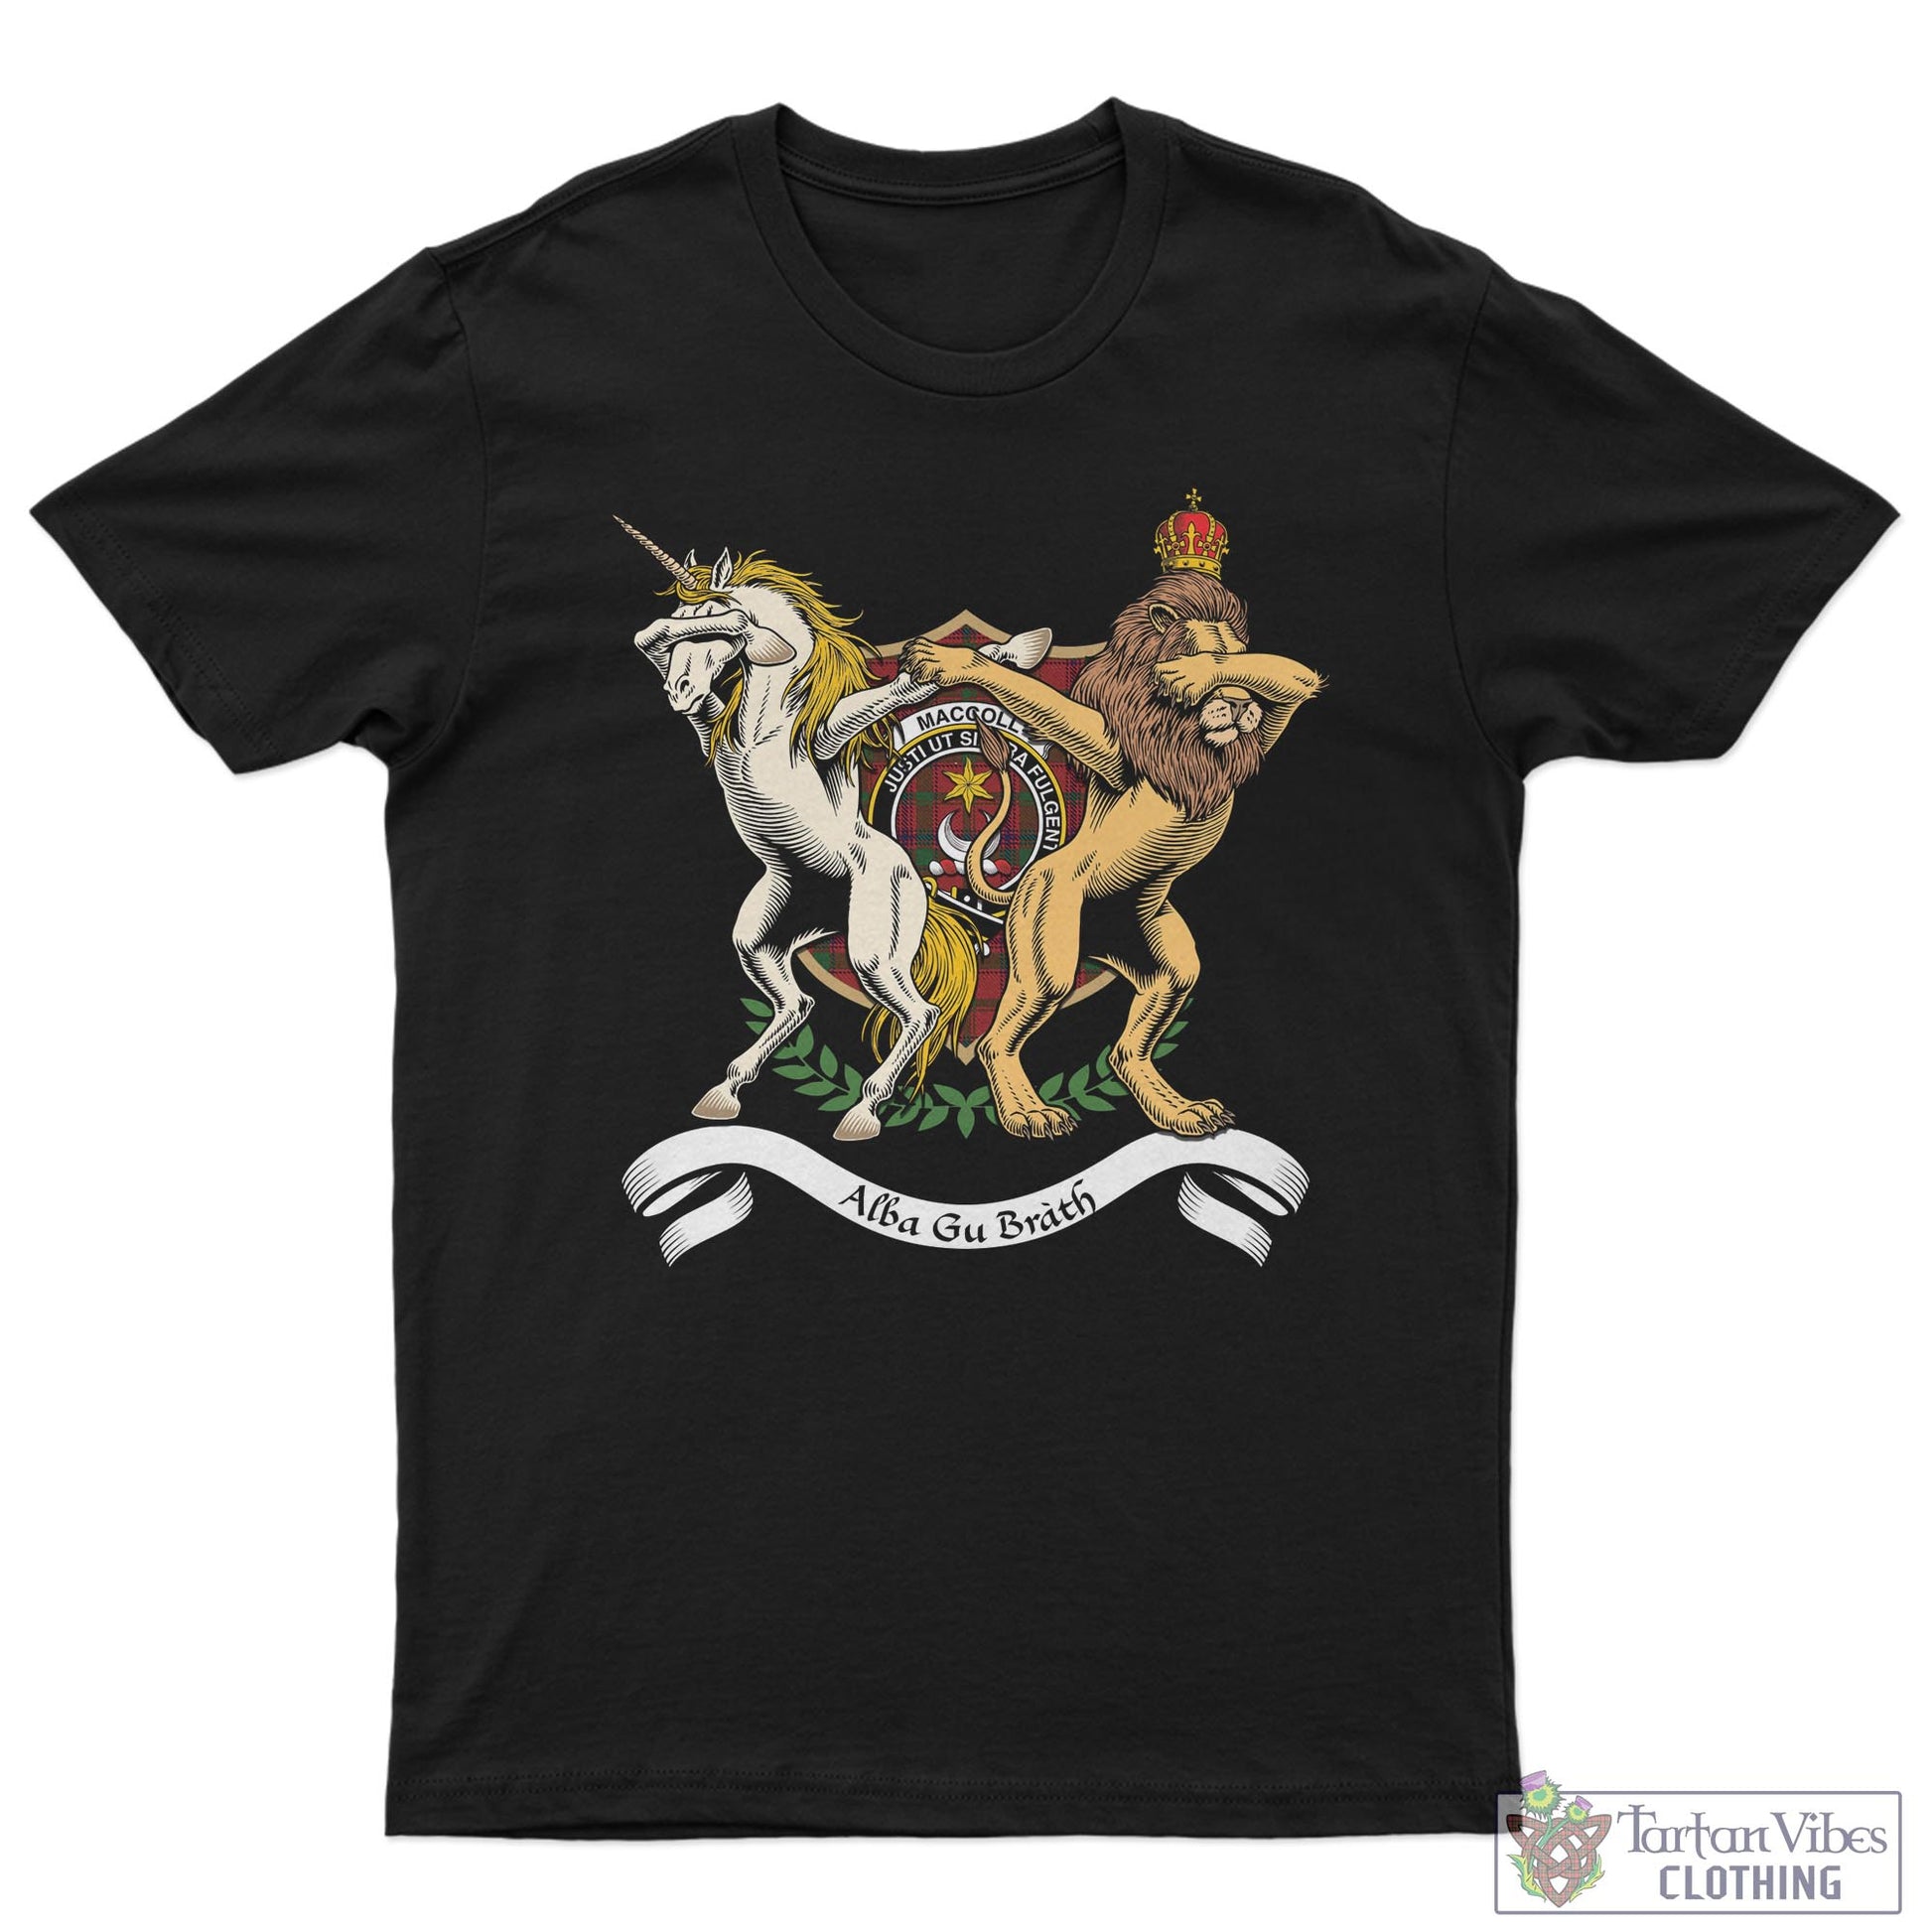 Tartan Vibes Clothing MacColl Family Crest Cotton Men's T-Shirt with Scotland Royal Coat Of Arm Funny Style